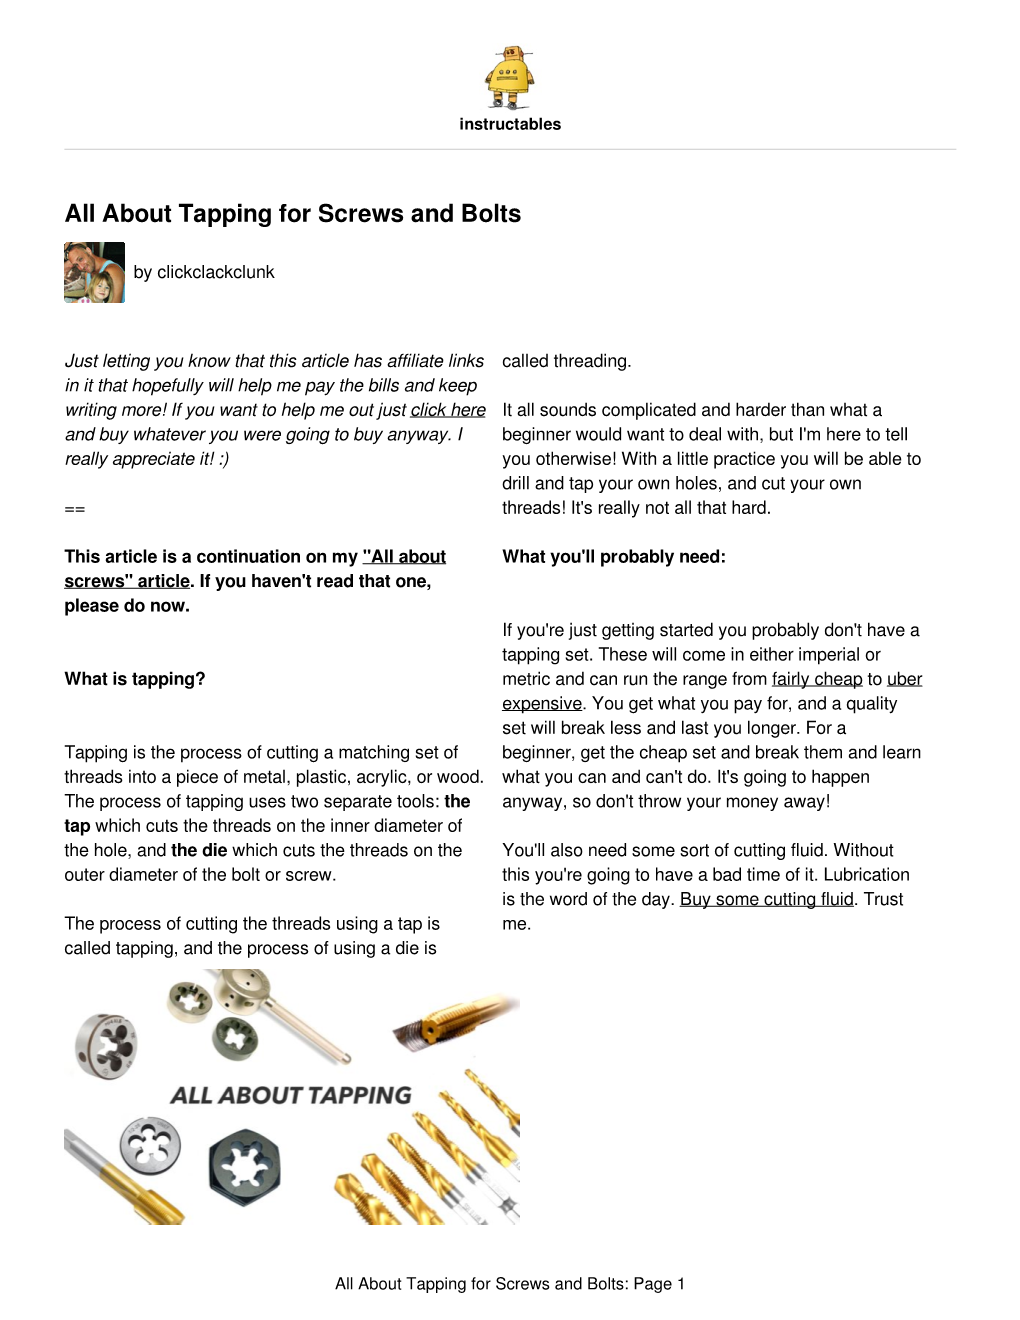 All About Tapping for Screws and Bolts